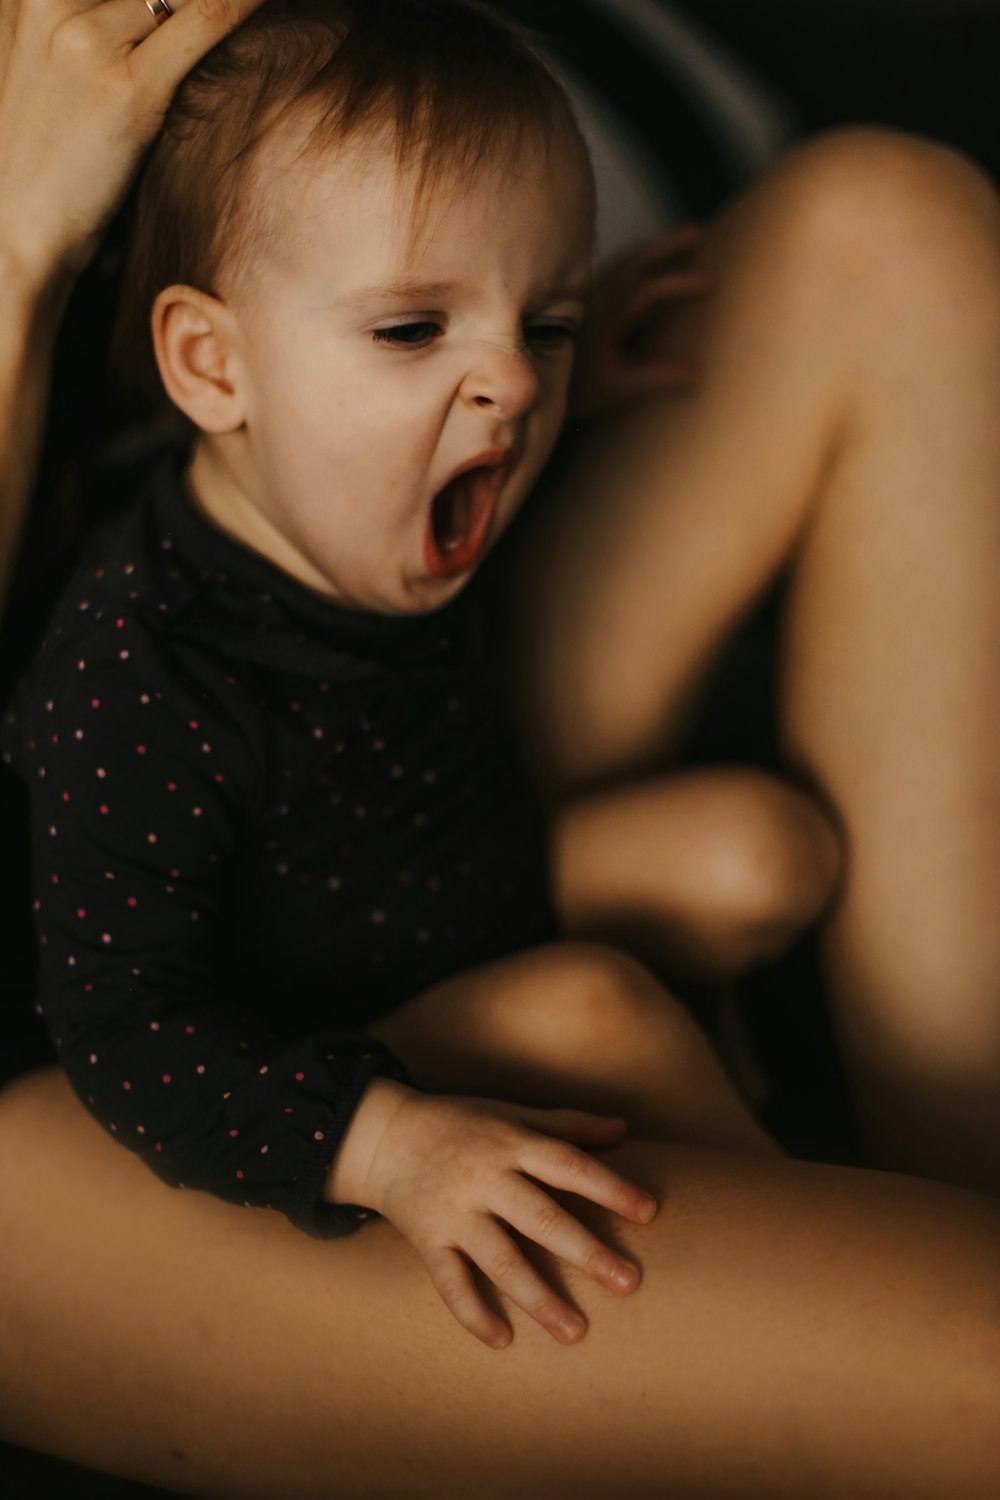 a baby crying on a person's lap